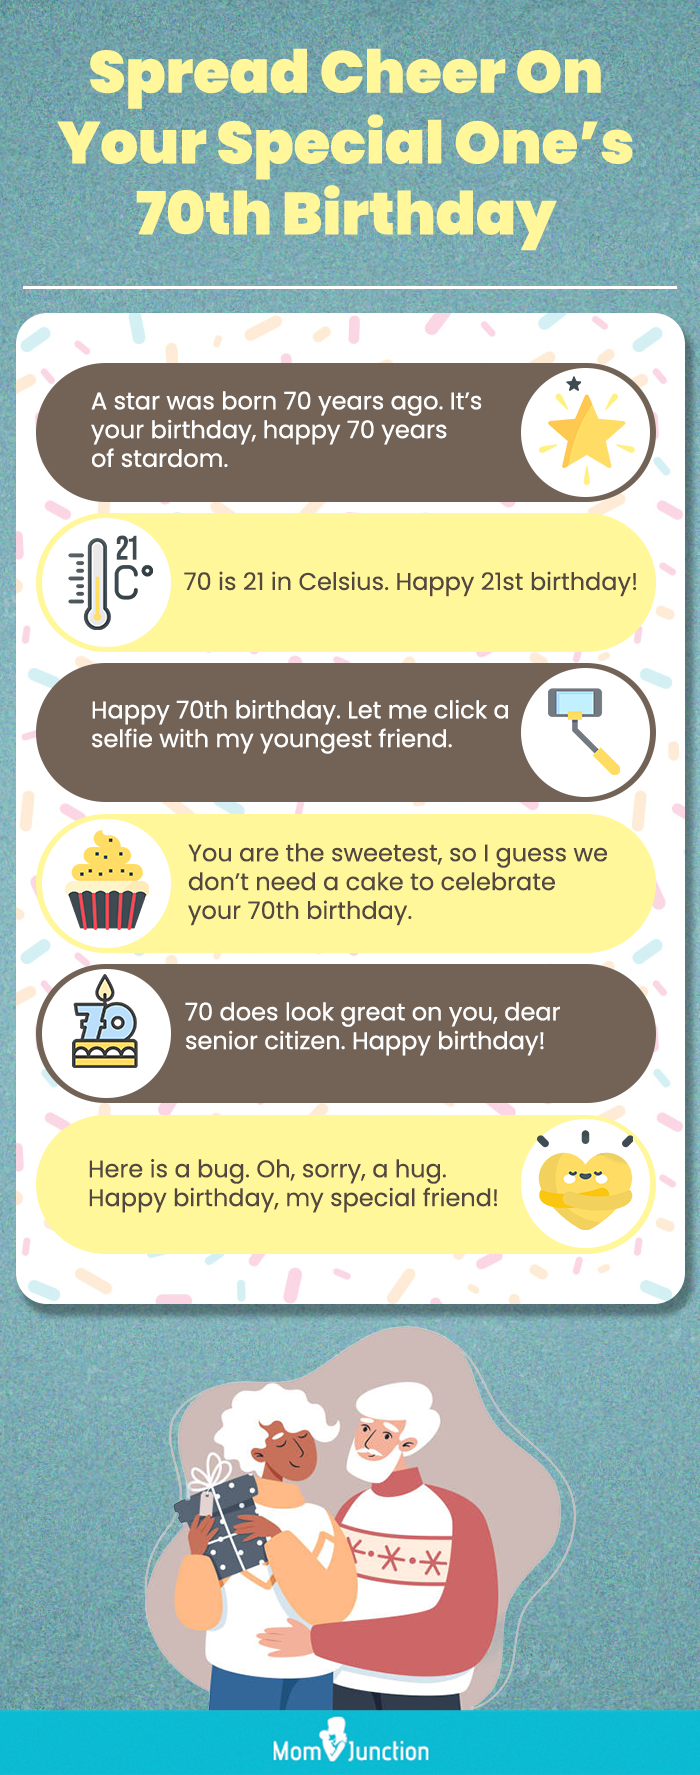 70th birthday wishes (infographic)